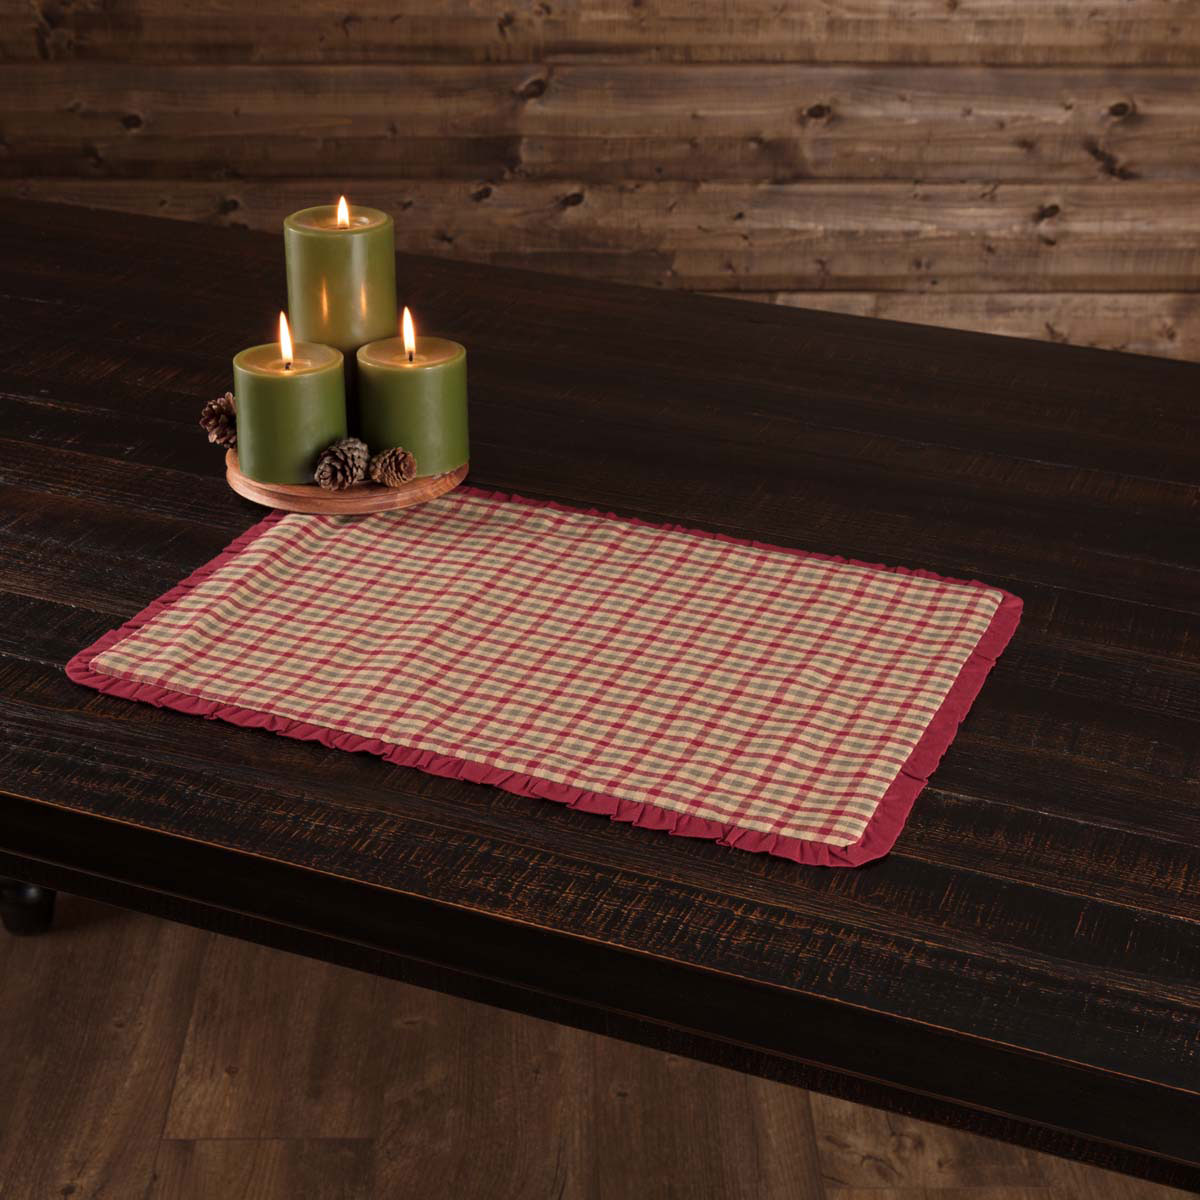 Jonathan Plaid Ruffled Primitive Christmas Placemats at The Weed Patch